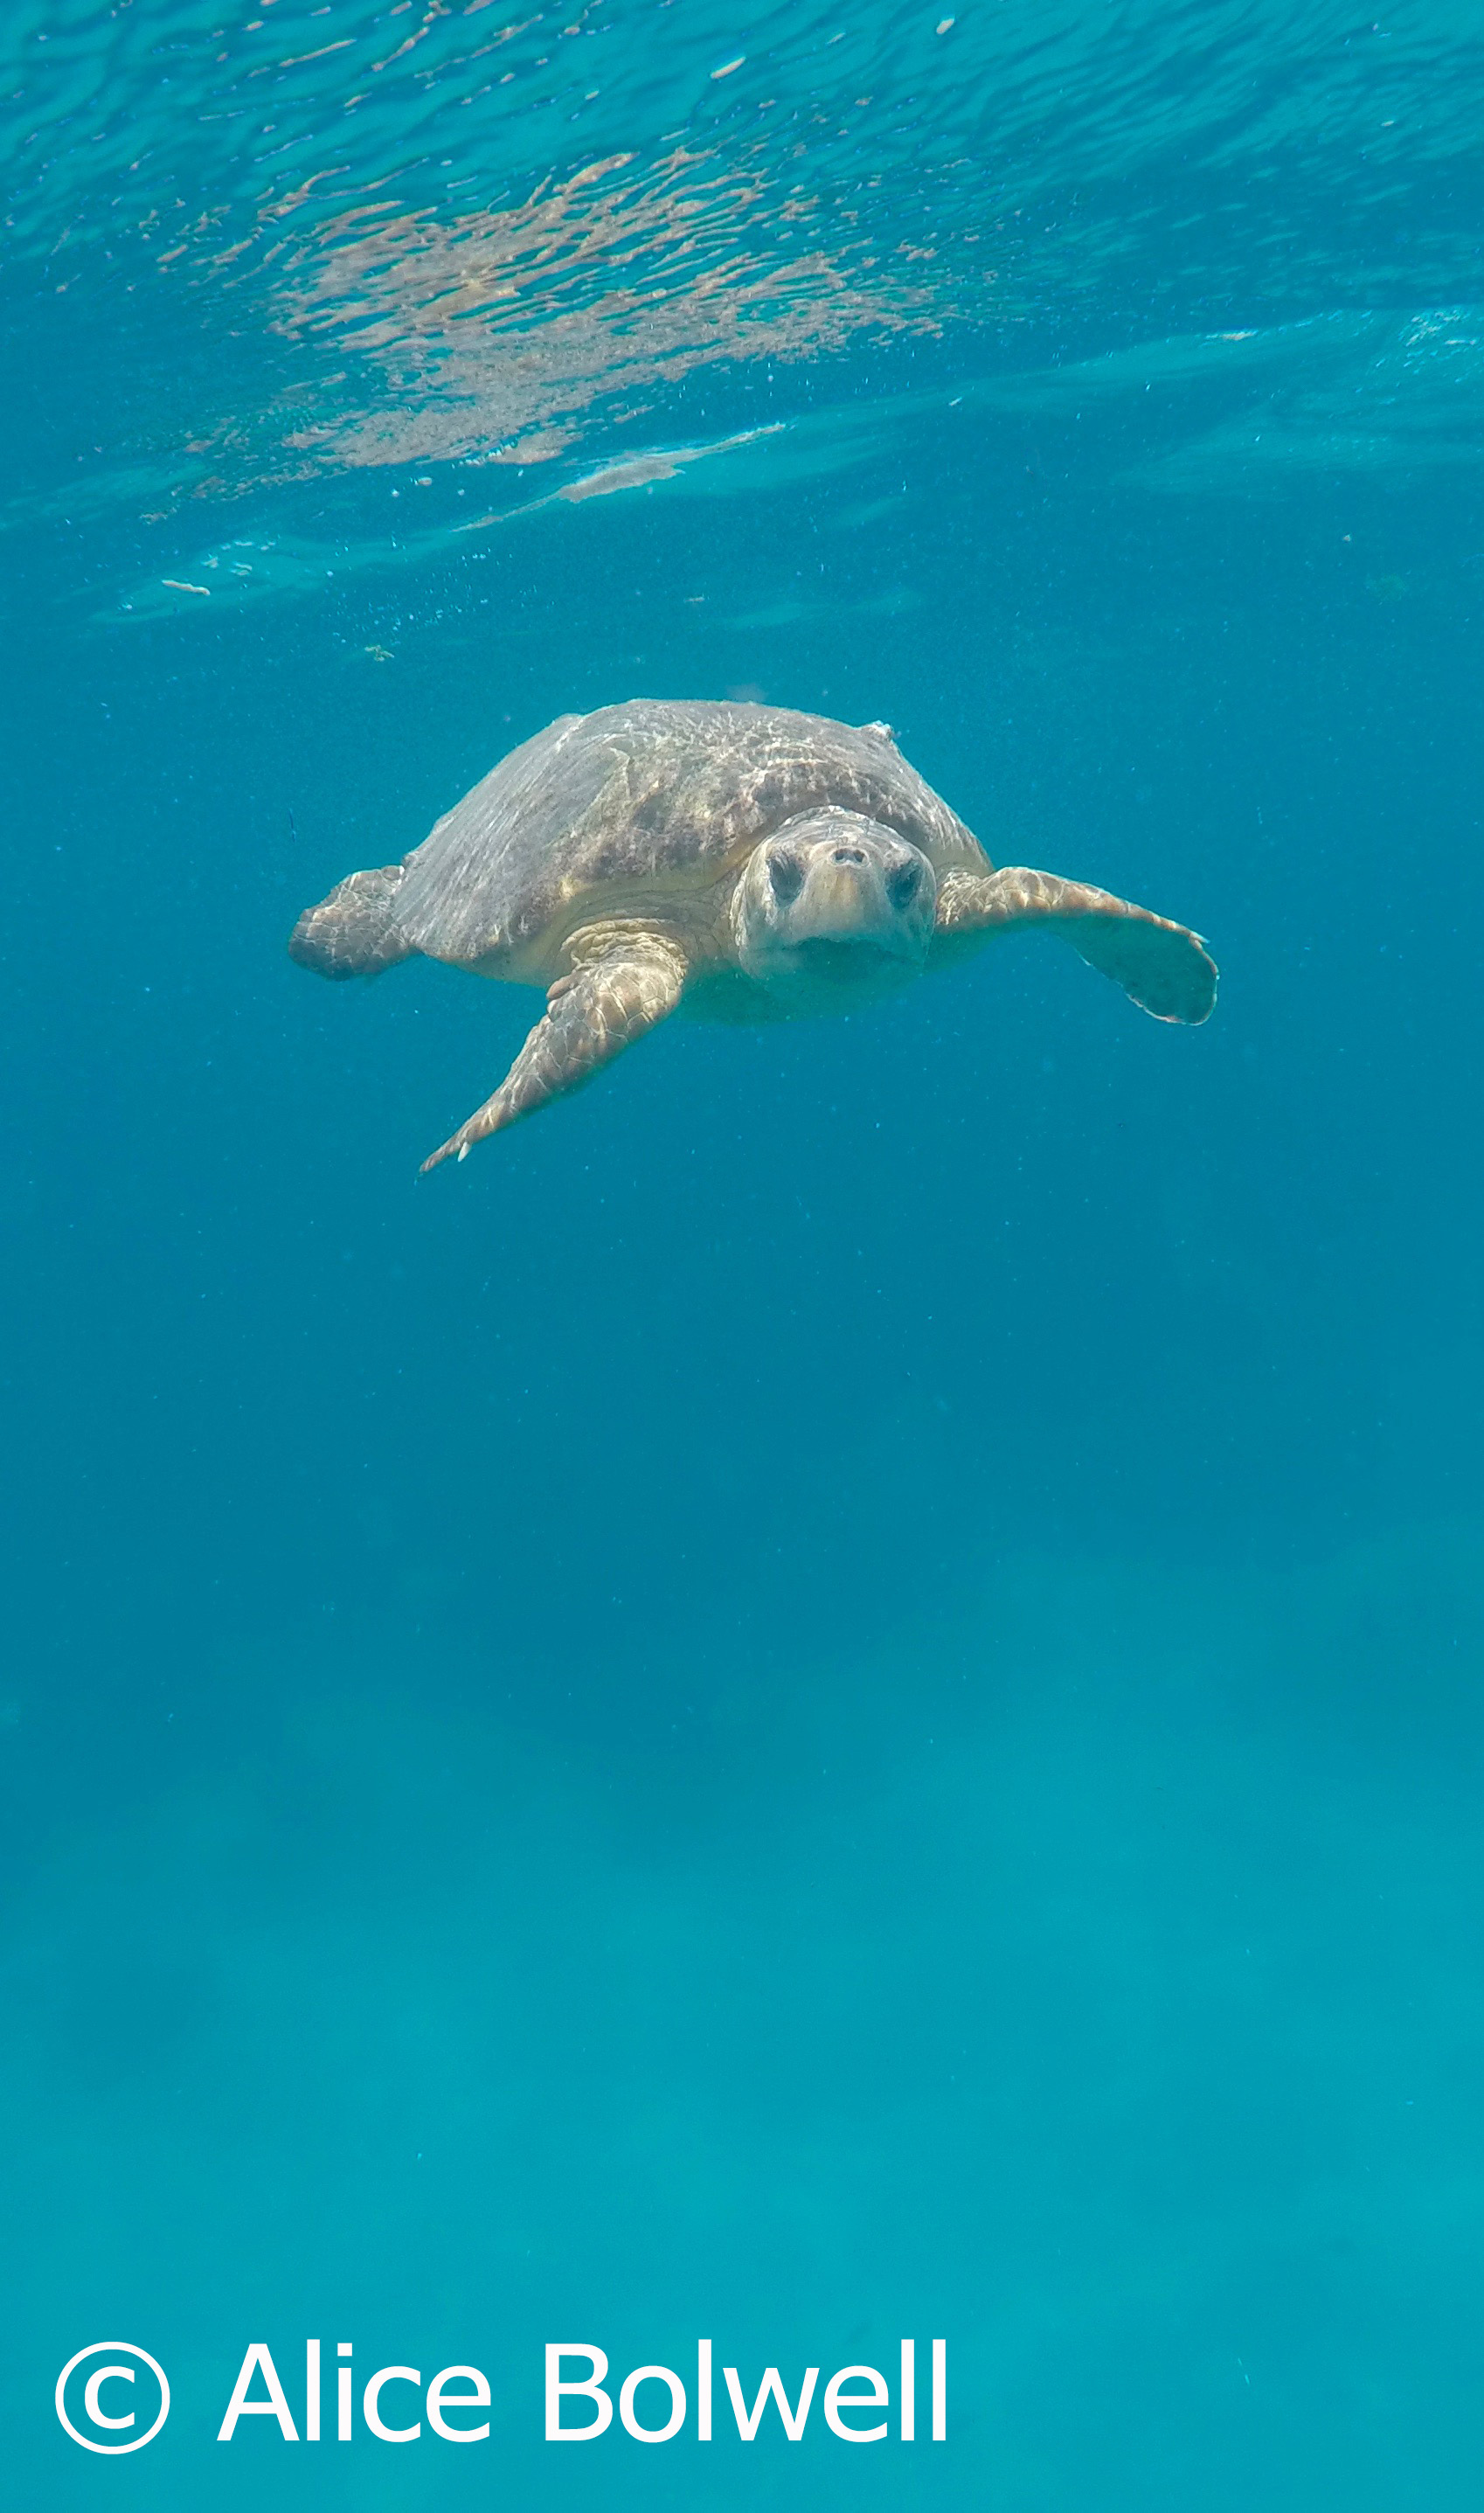 Alice saw and photographed a loggerhead turtle - so the dive wasn't a complete waste of time.